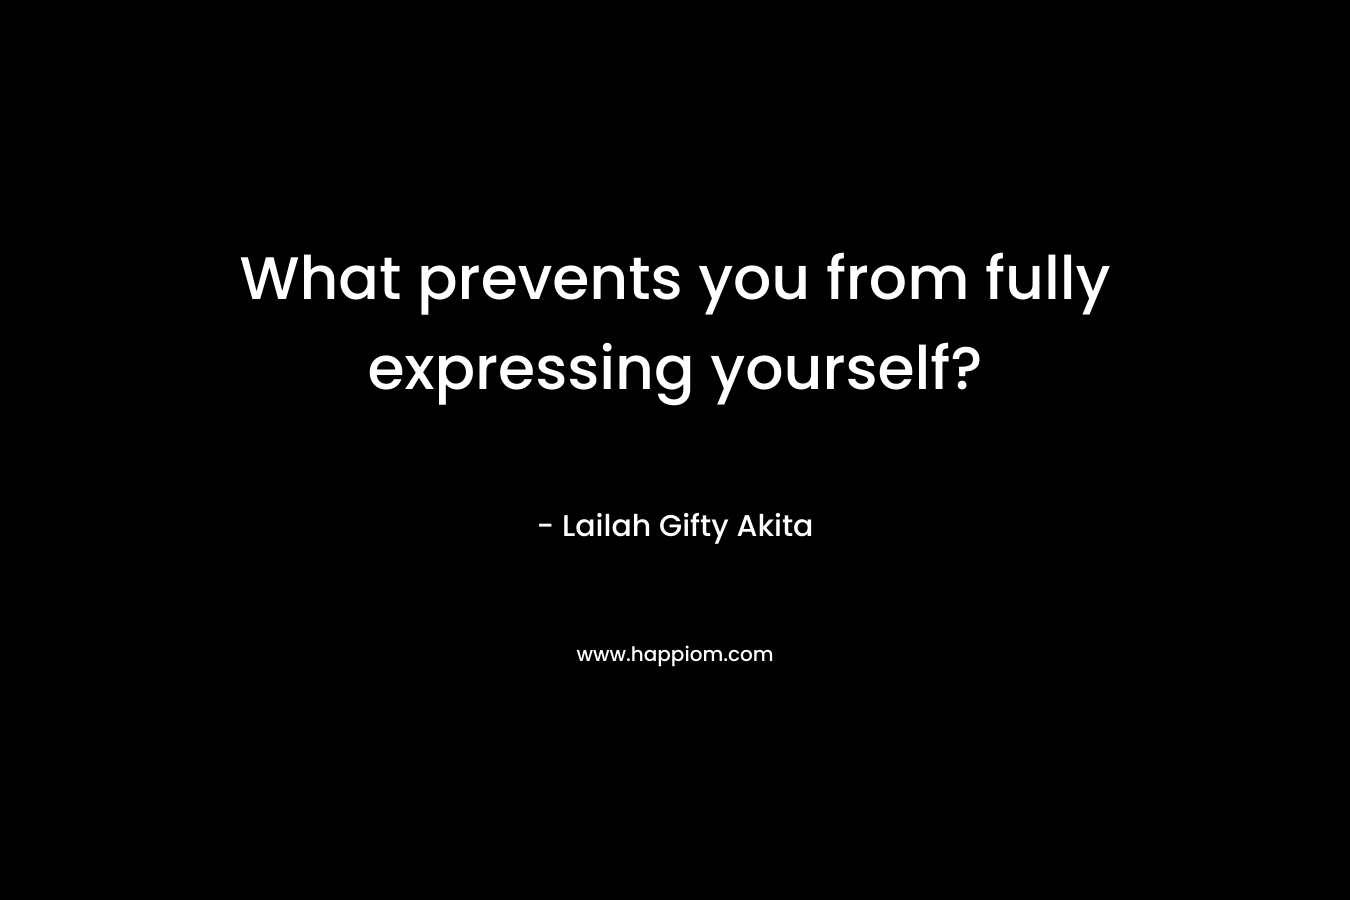 What prevents you from fully expressing yourself?